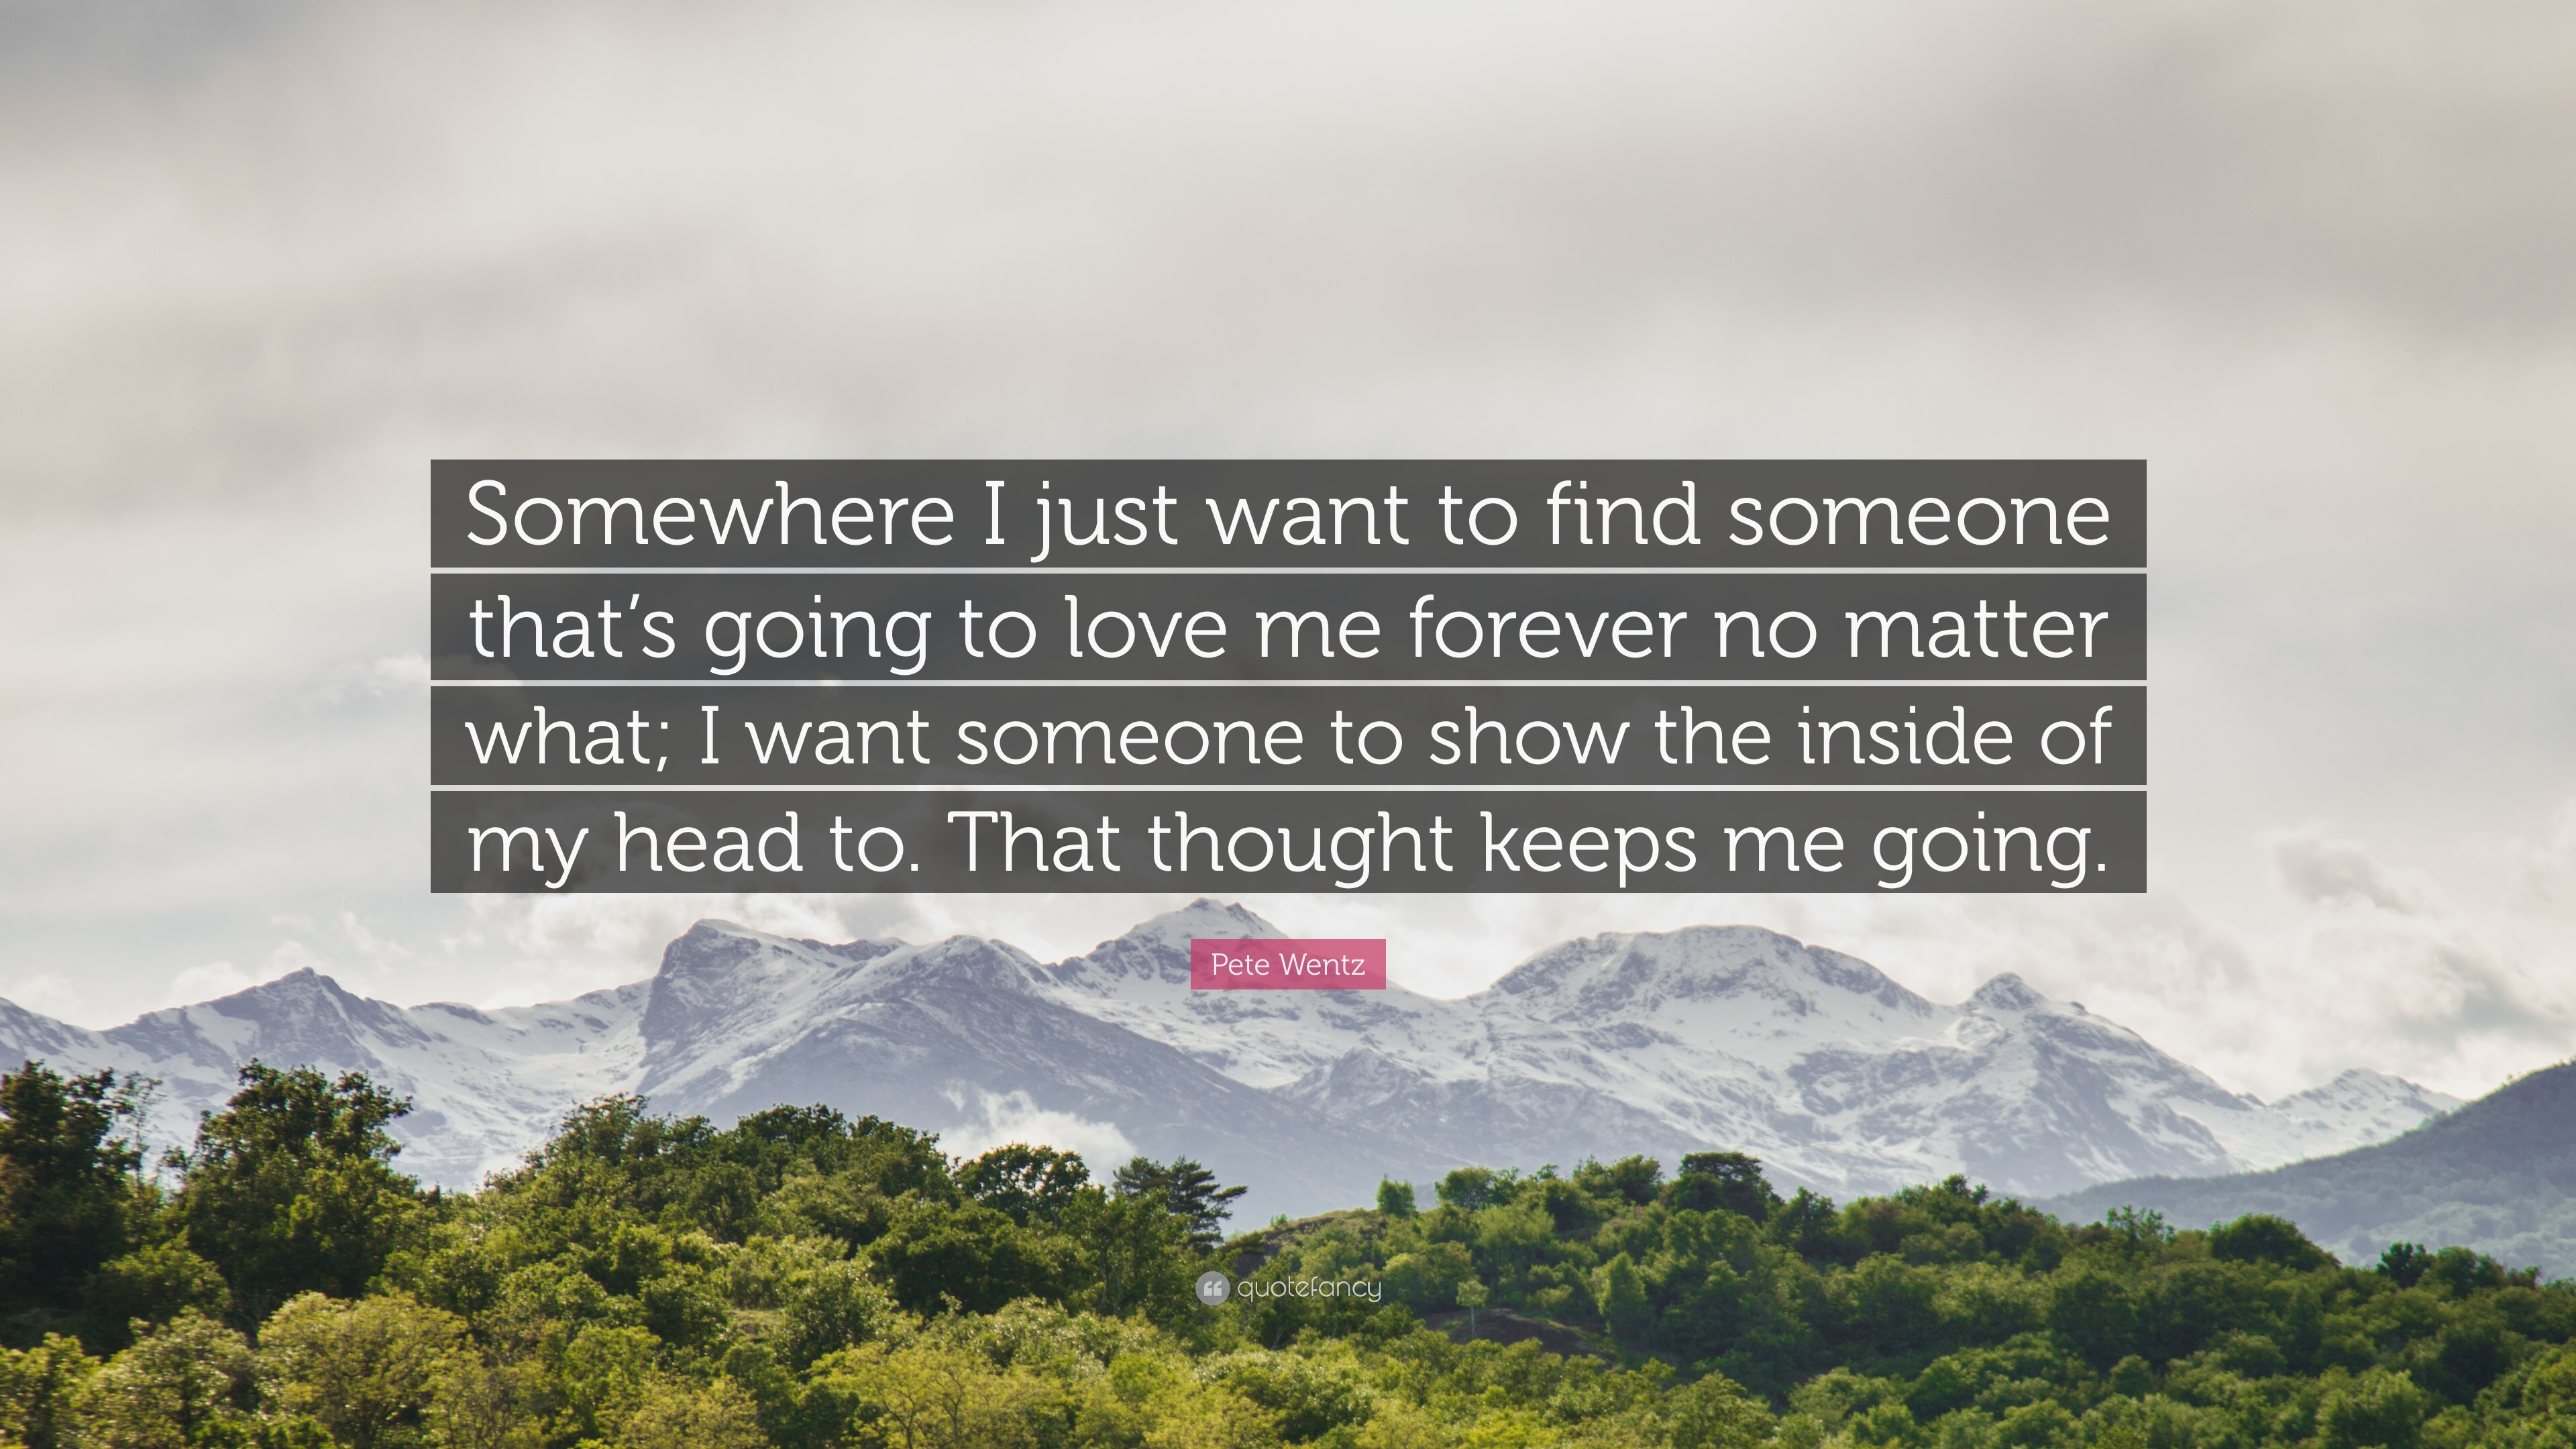 Pete Wentz Quote “Somewhere I just want to find someone that s going to love